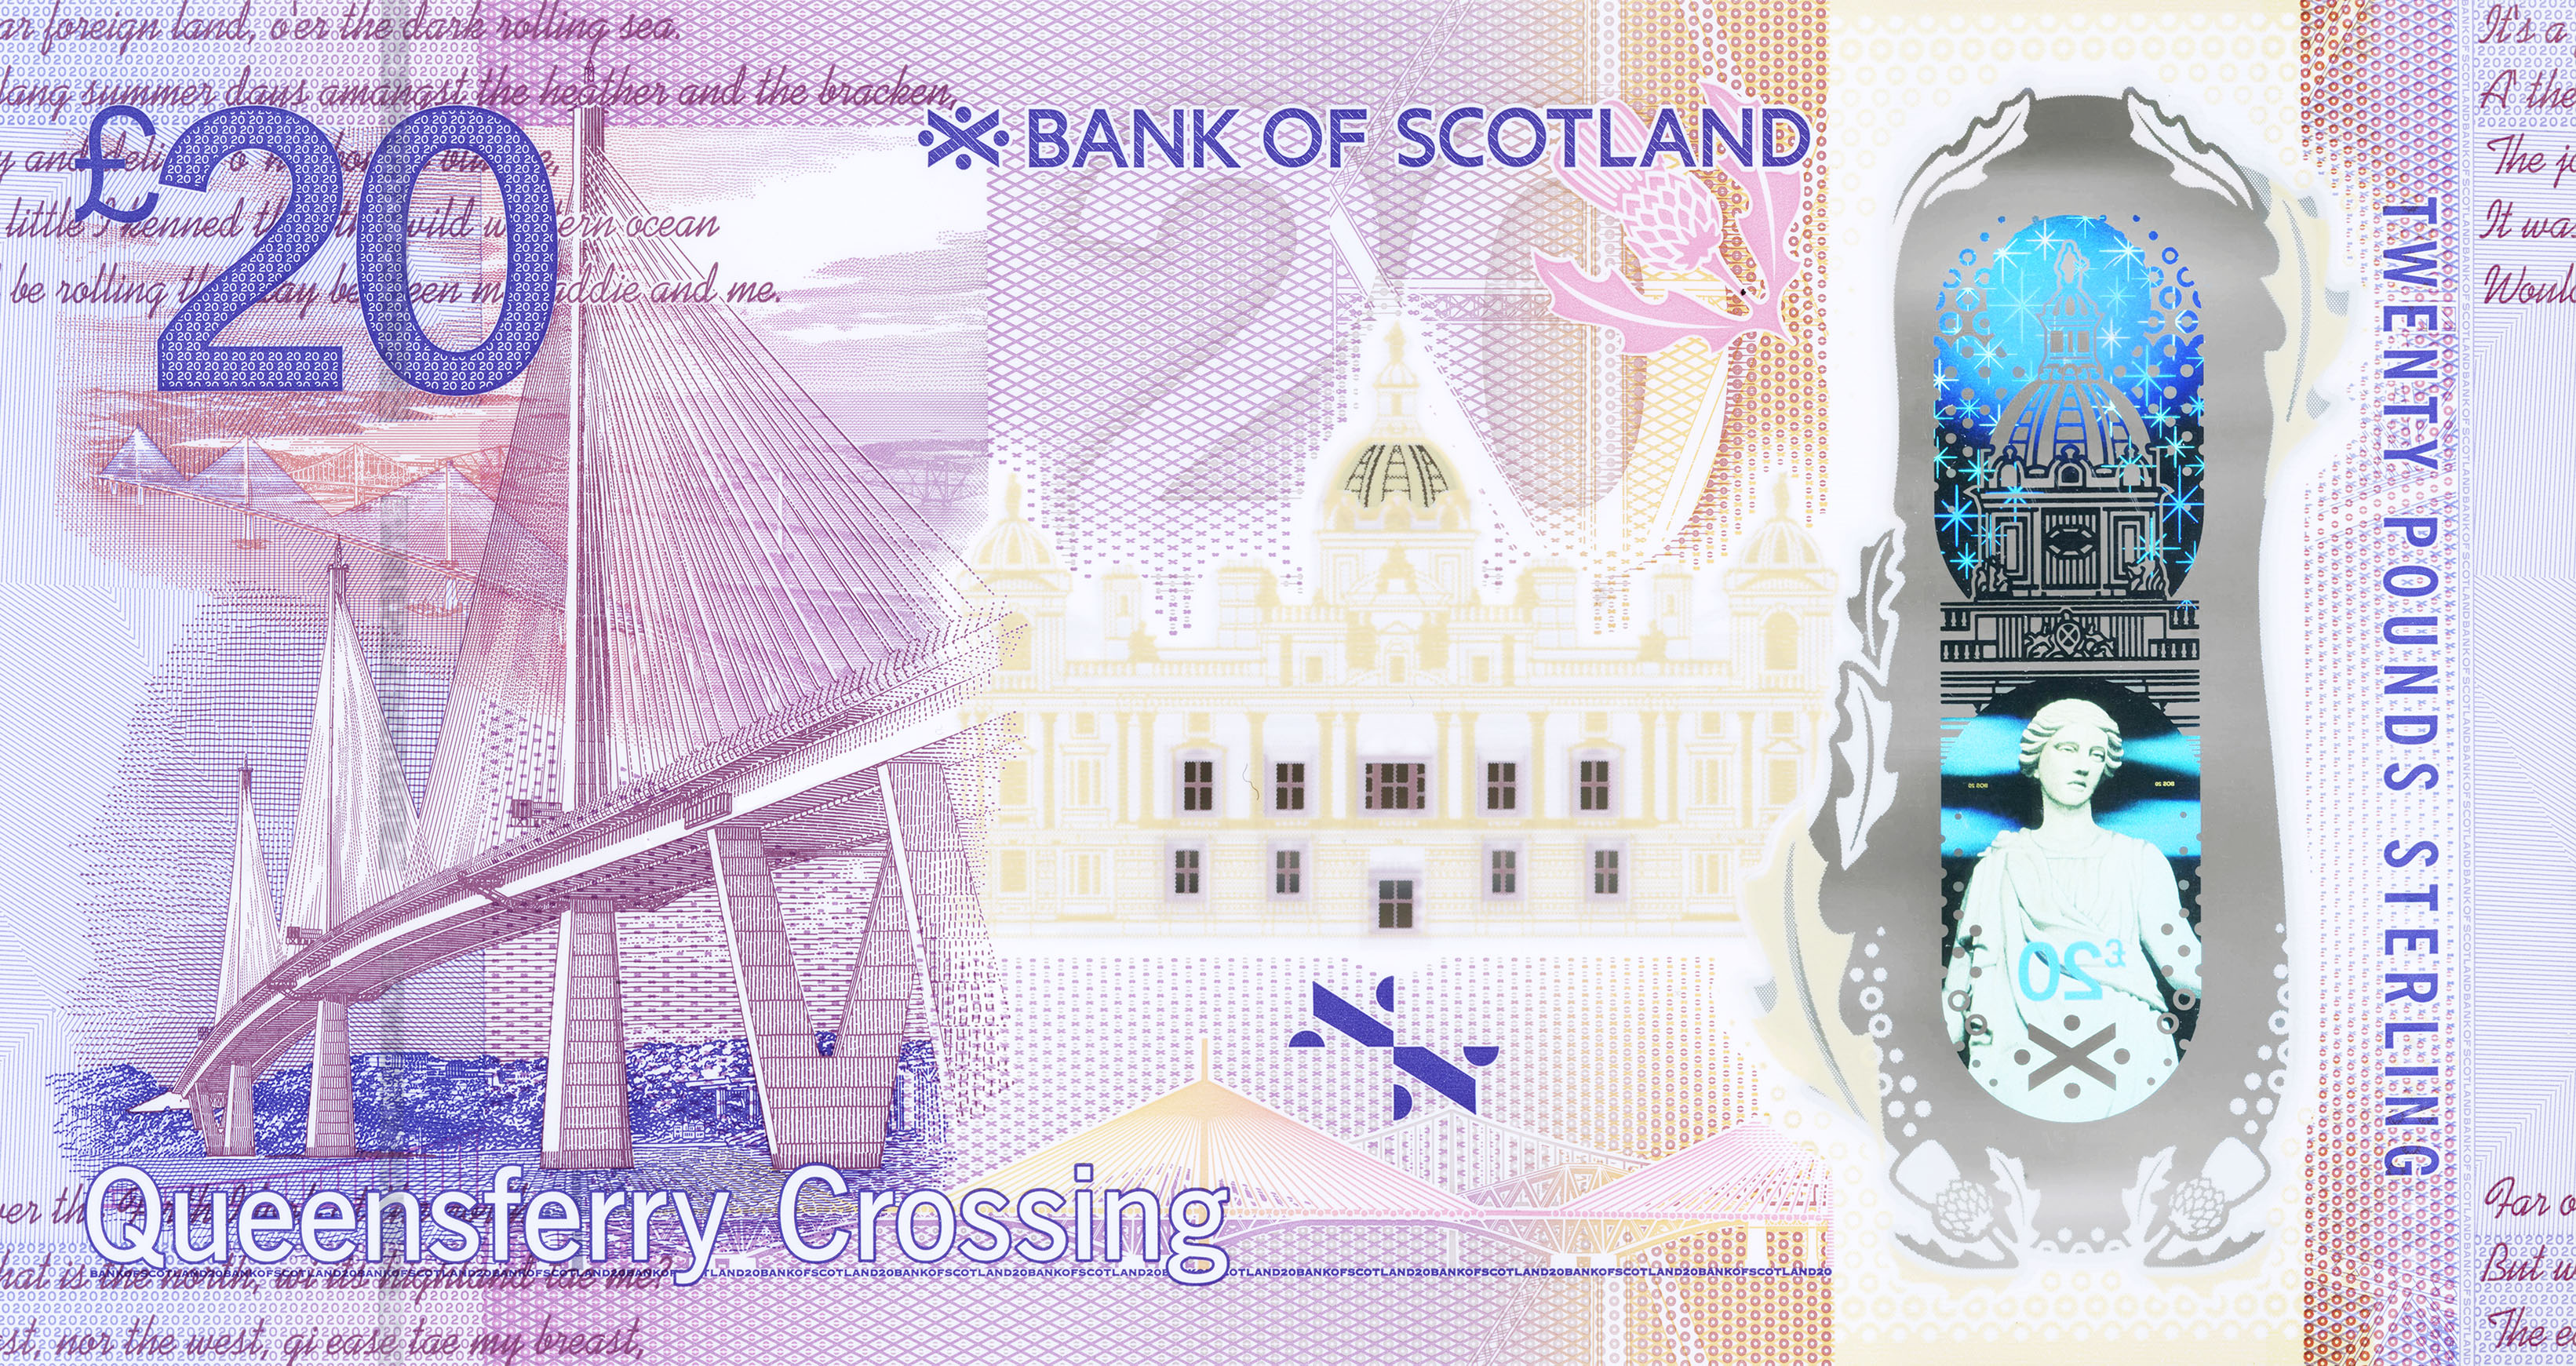 And finally... Queensferry Crossing featured on Bank of Scotland's latest £20 note